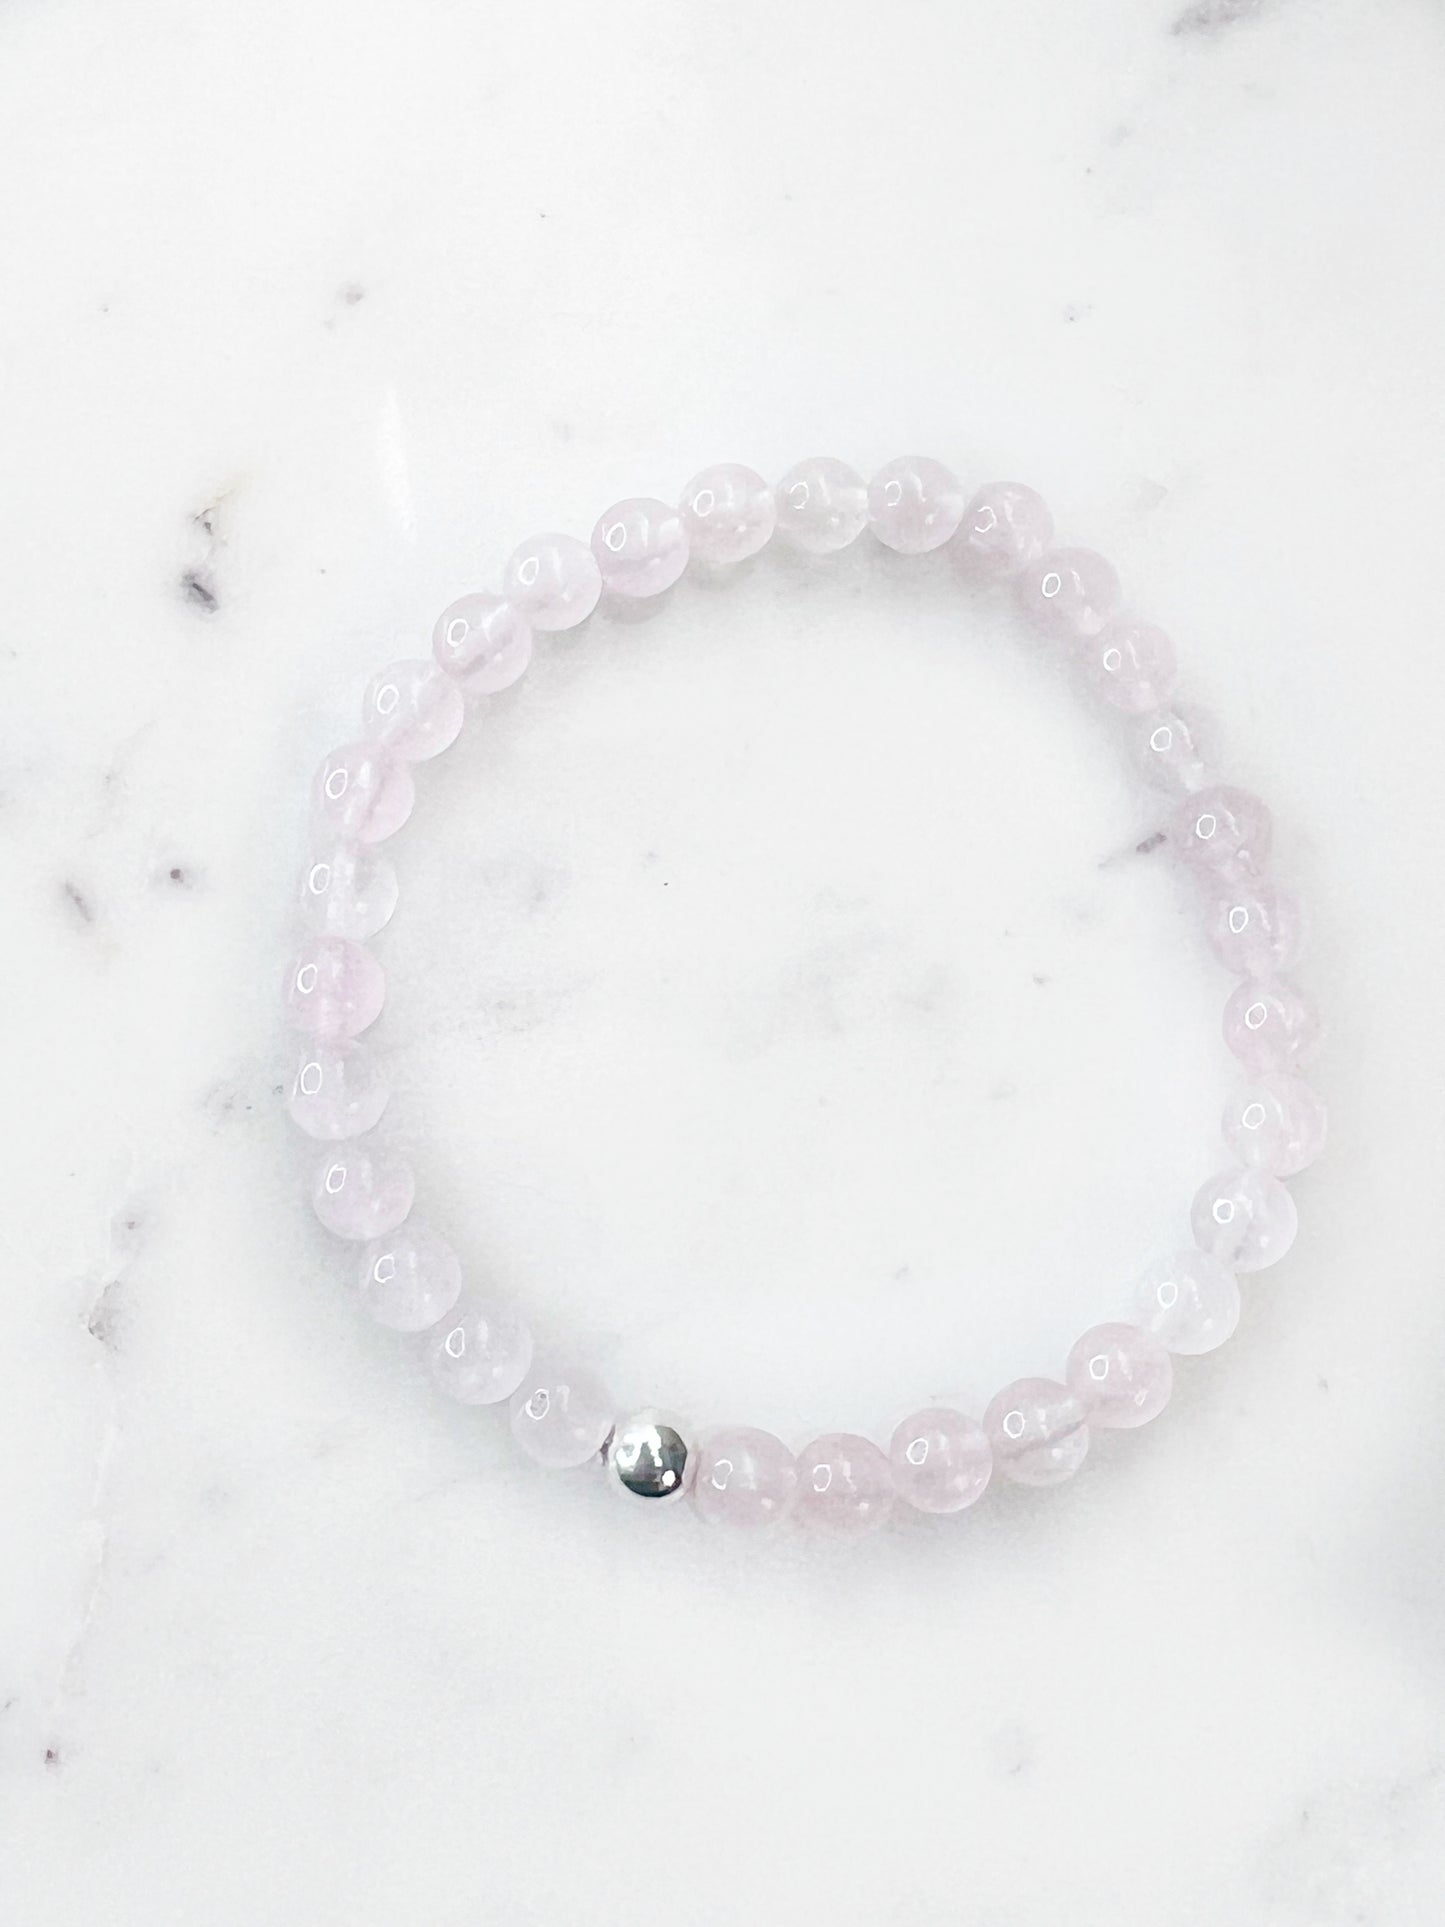 Rose Quartz stretch bracelet with one silver bead on a marbled white background.